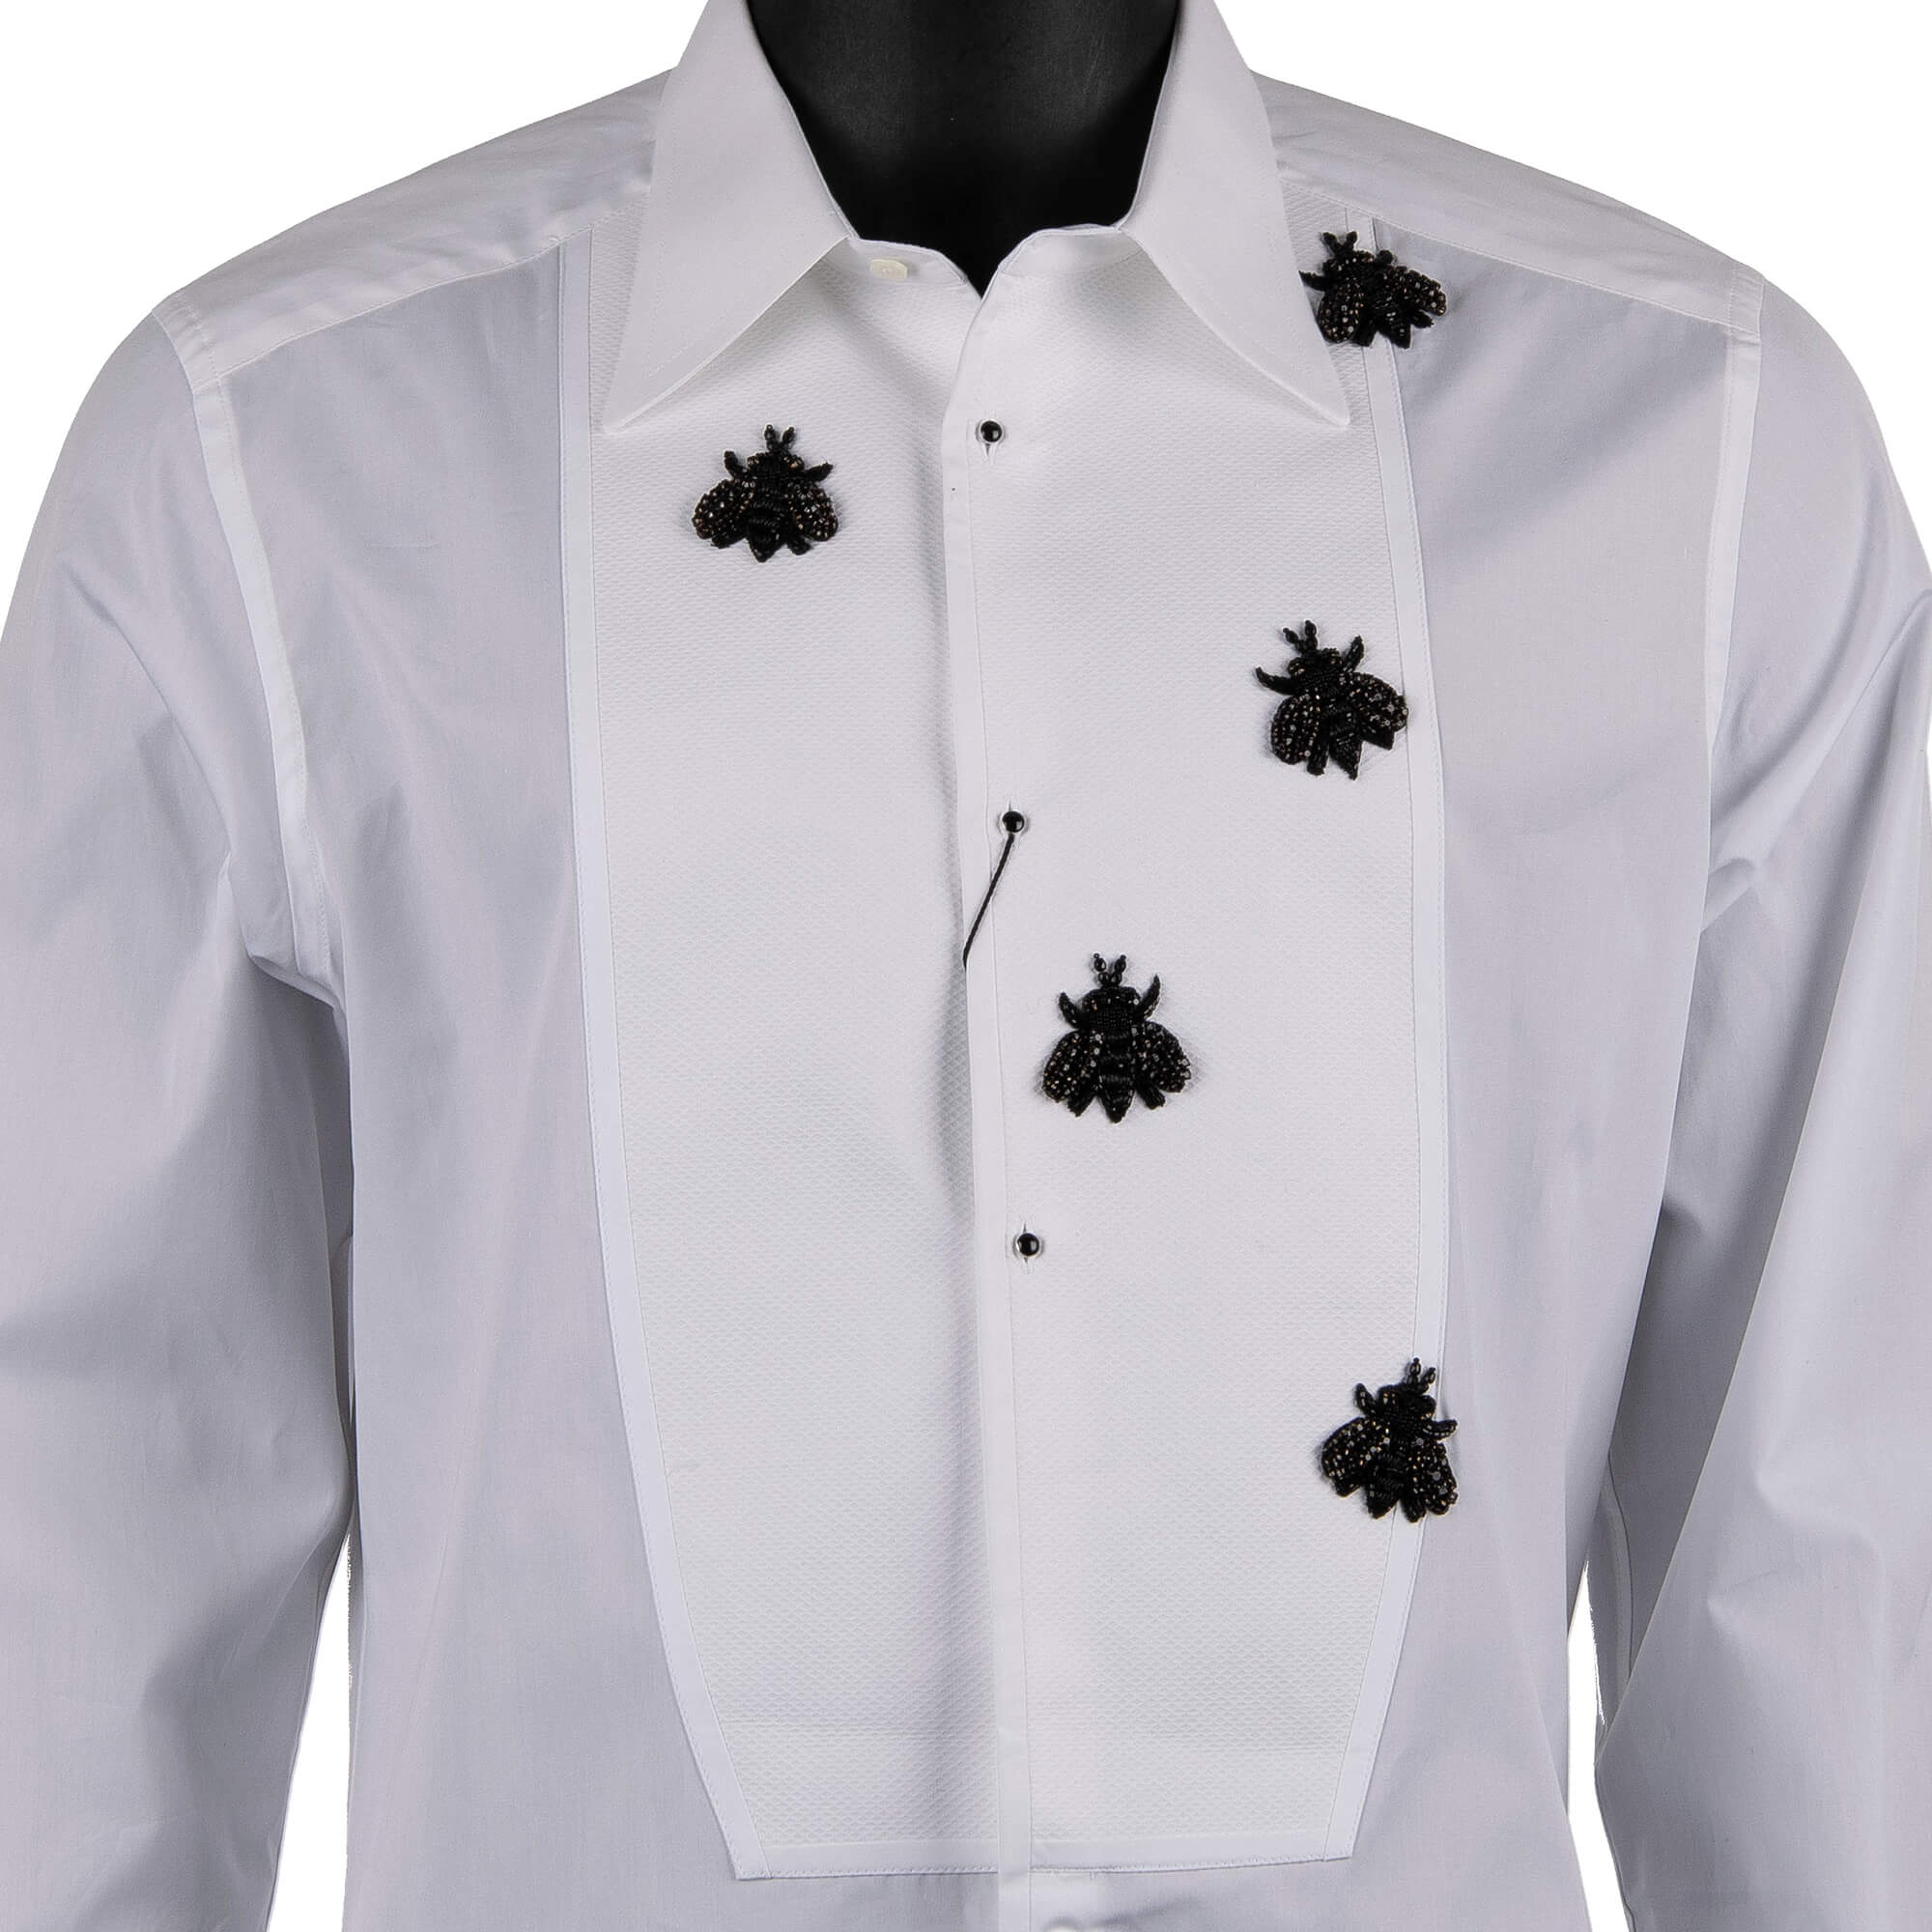 Dolce & Gabbana Tuxedo Shirt with Bee Embroidery White | FASHION ROOMS